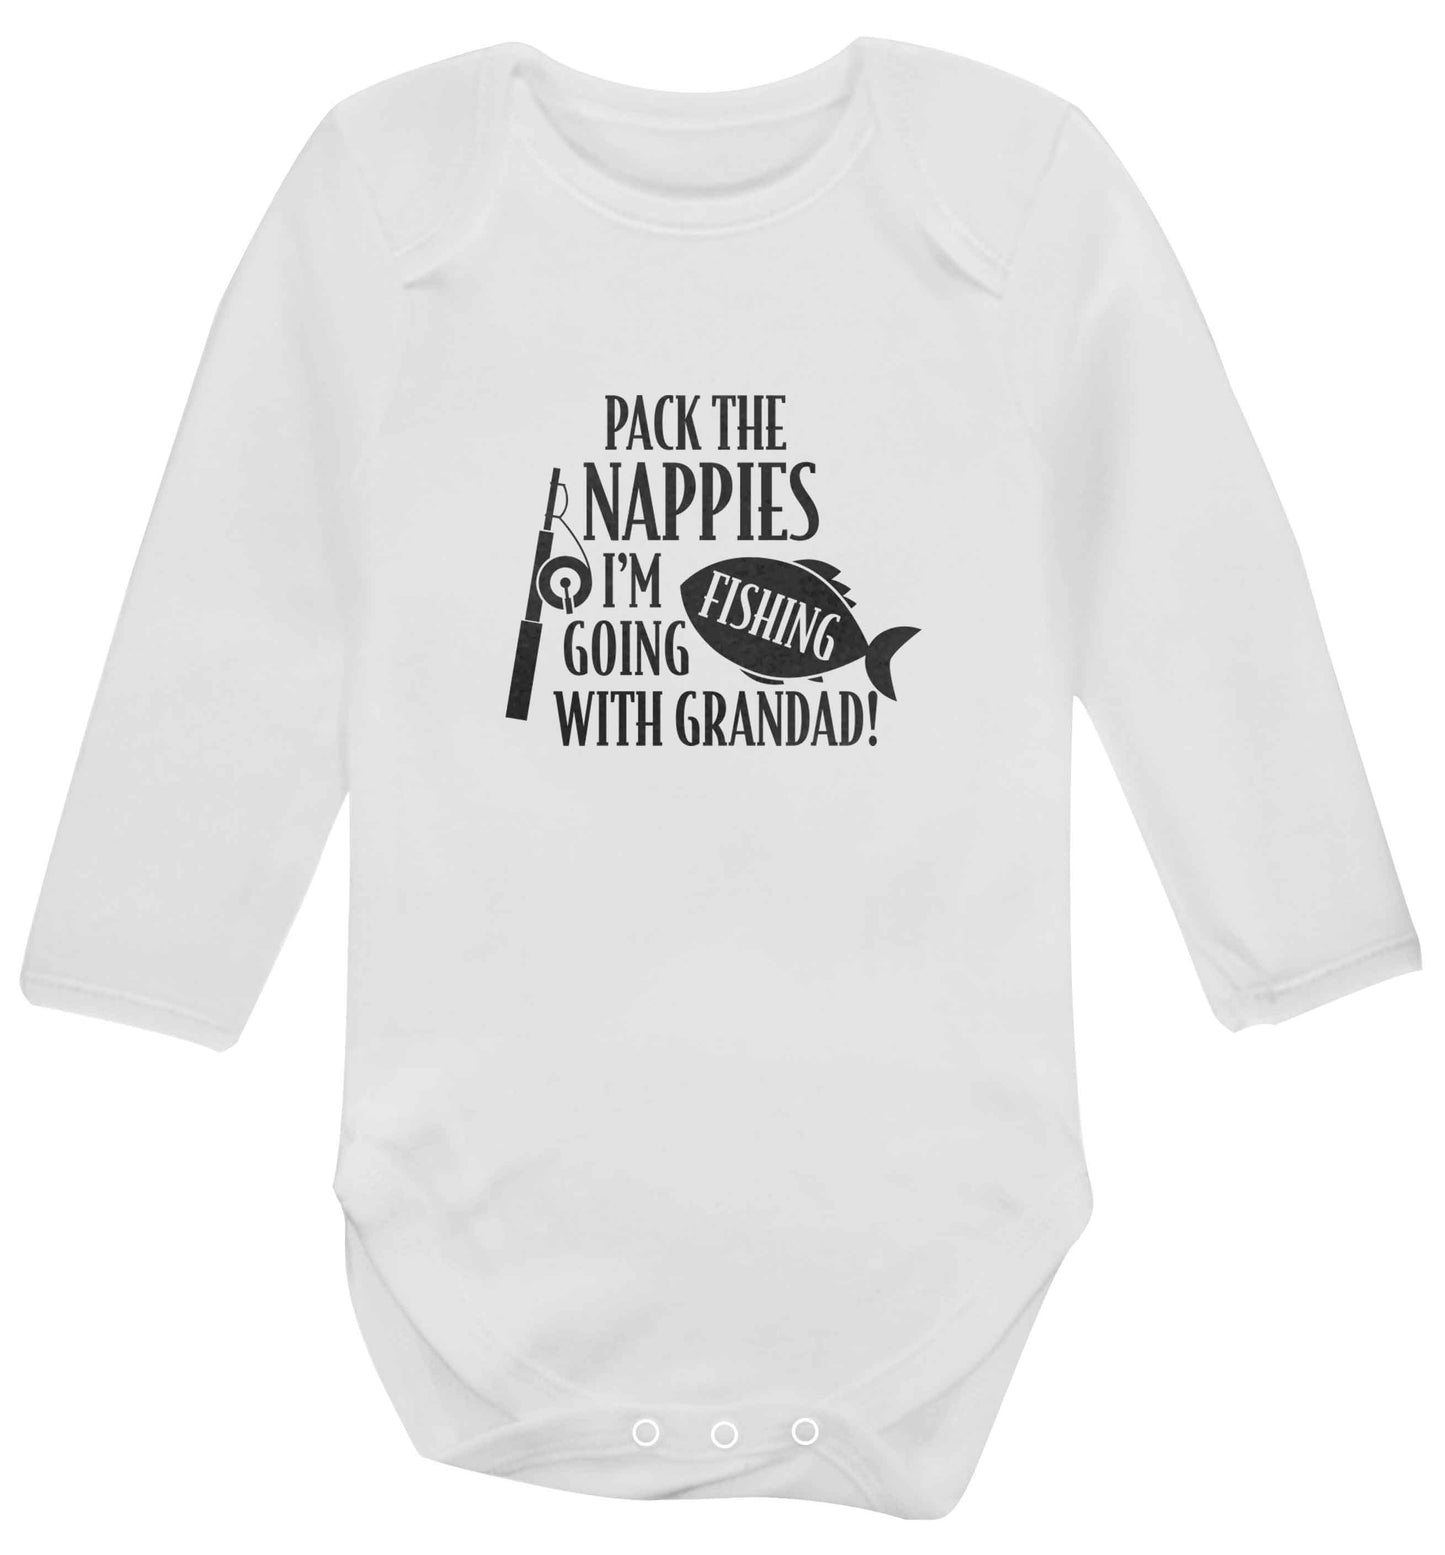 Pack the nappies I'm going fishing with Grandad baby vest long sleeved white 6-12 months